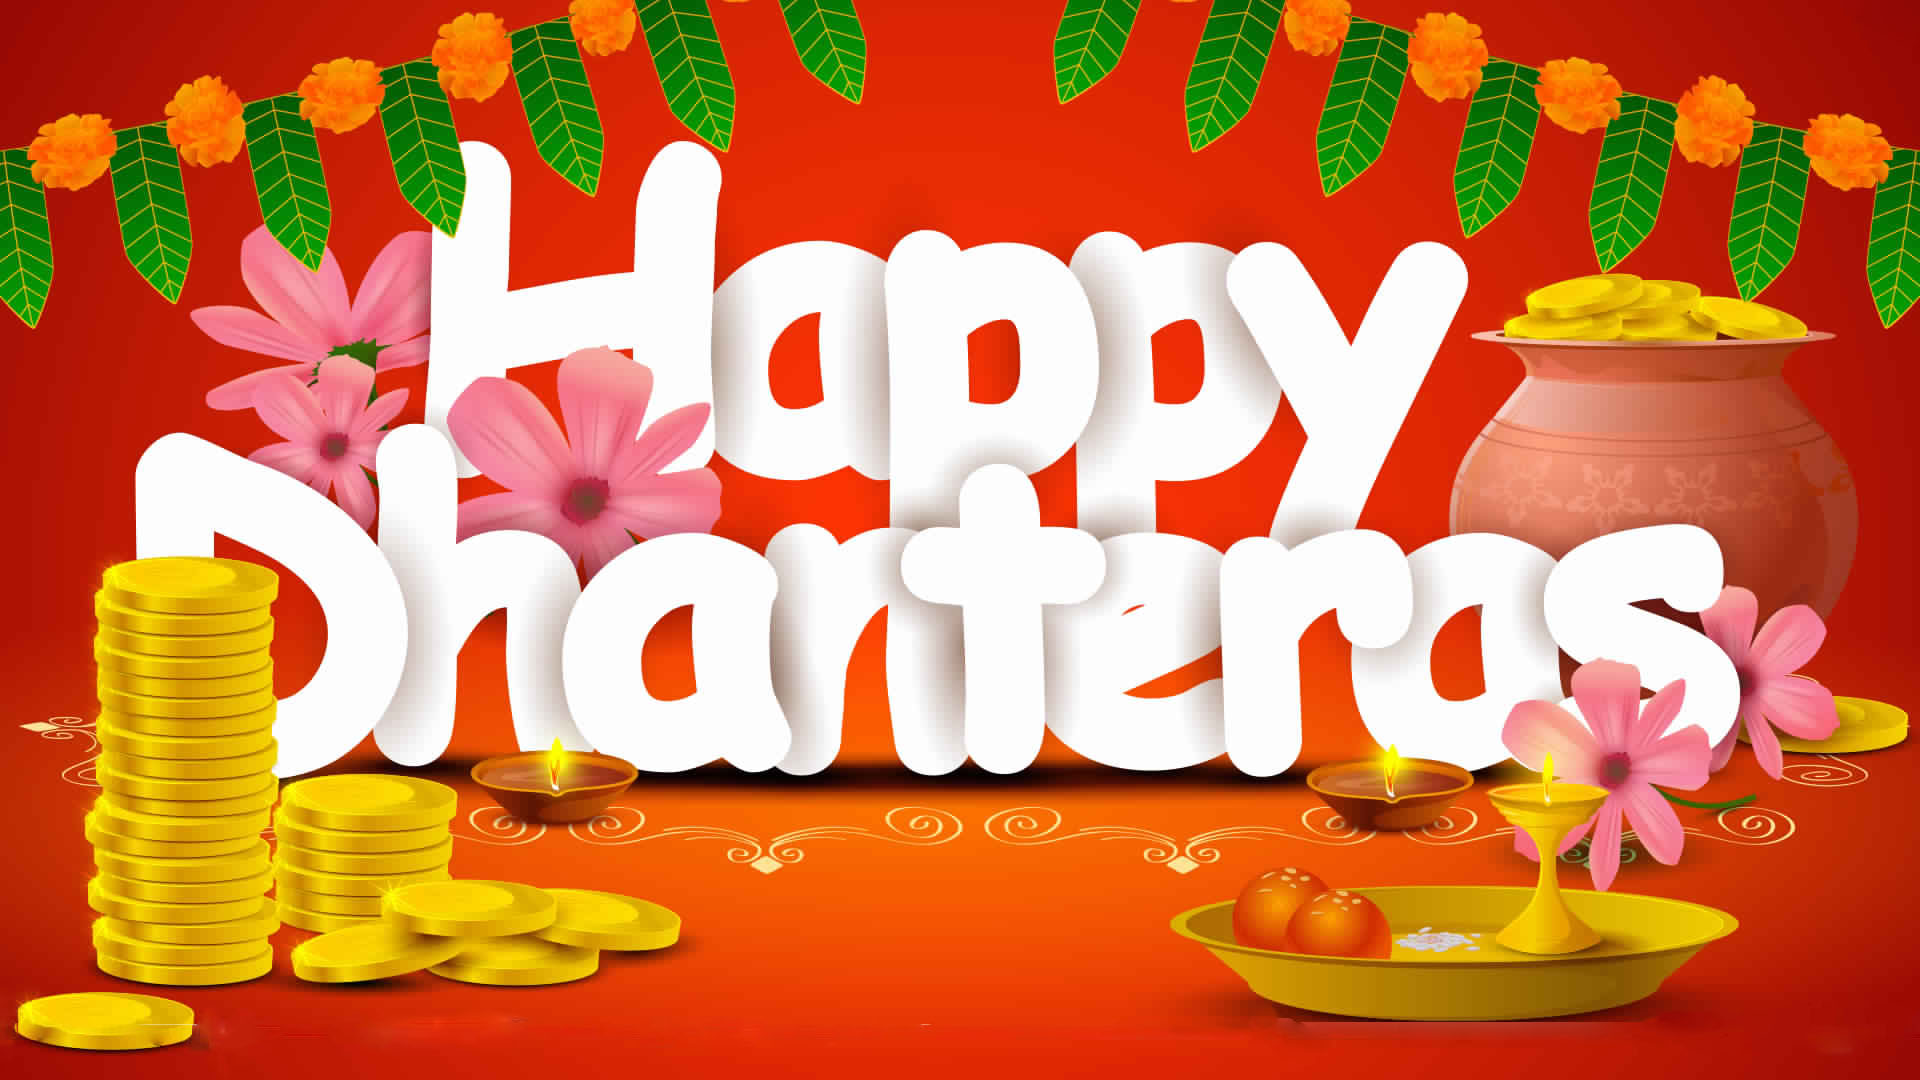 Happy Dhanteras Images Free Download